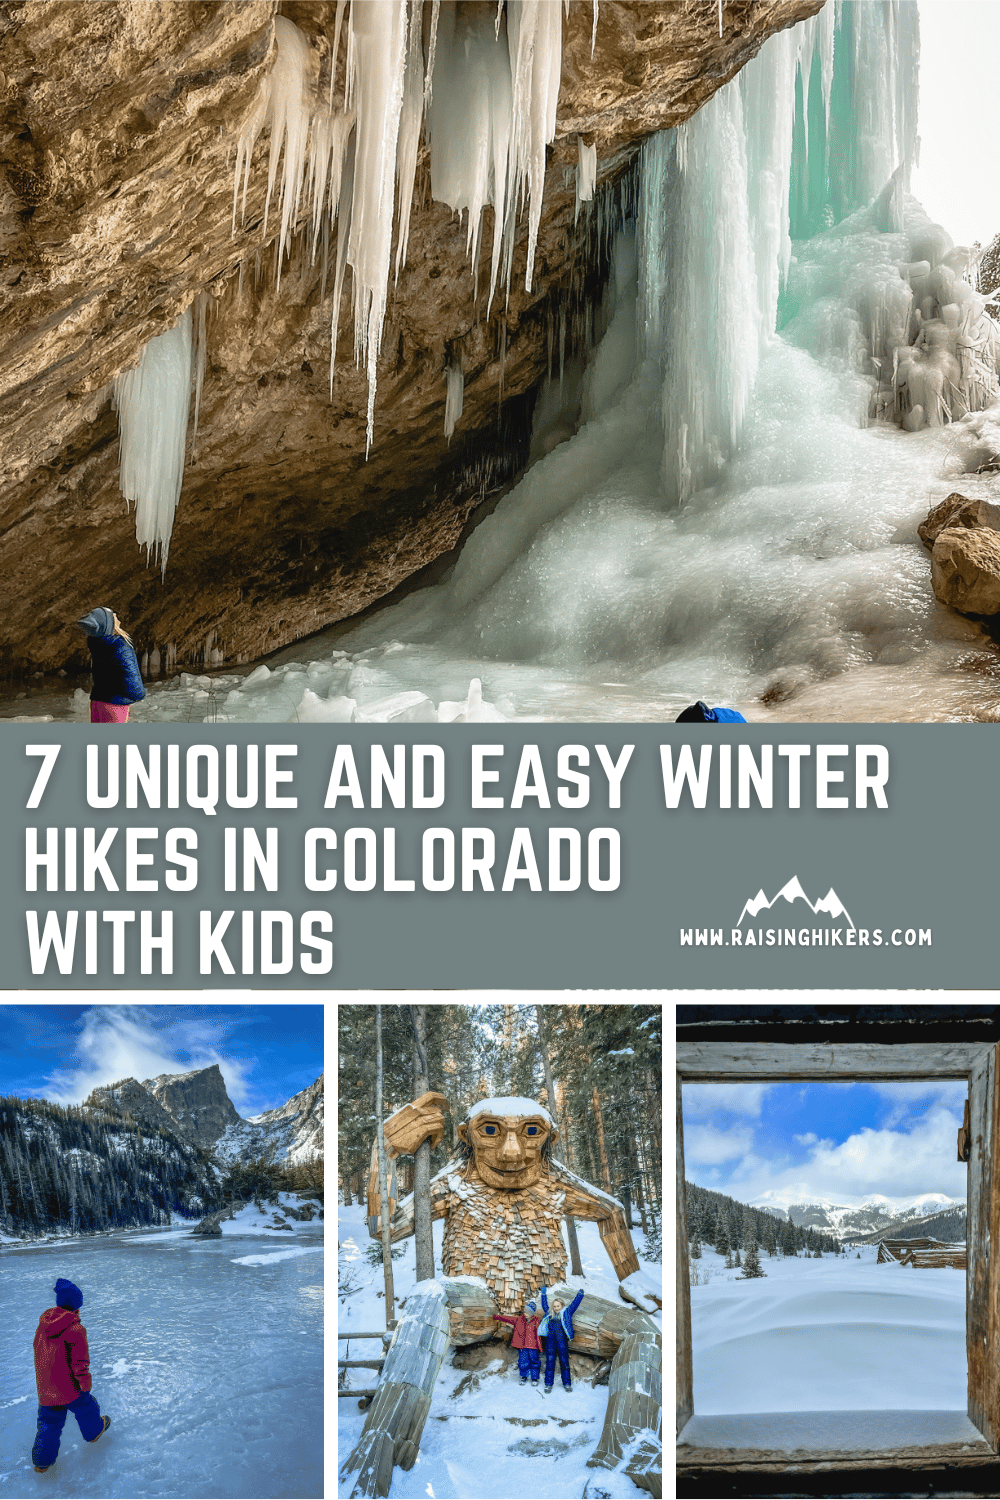 7 Unique and Easy Winter Hikes in Colorado with Kids